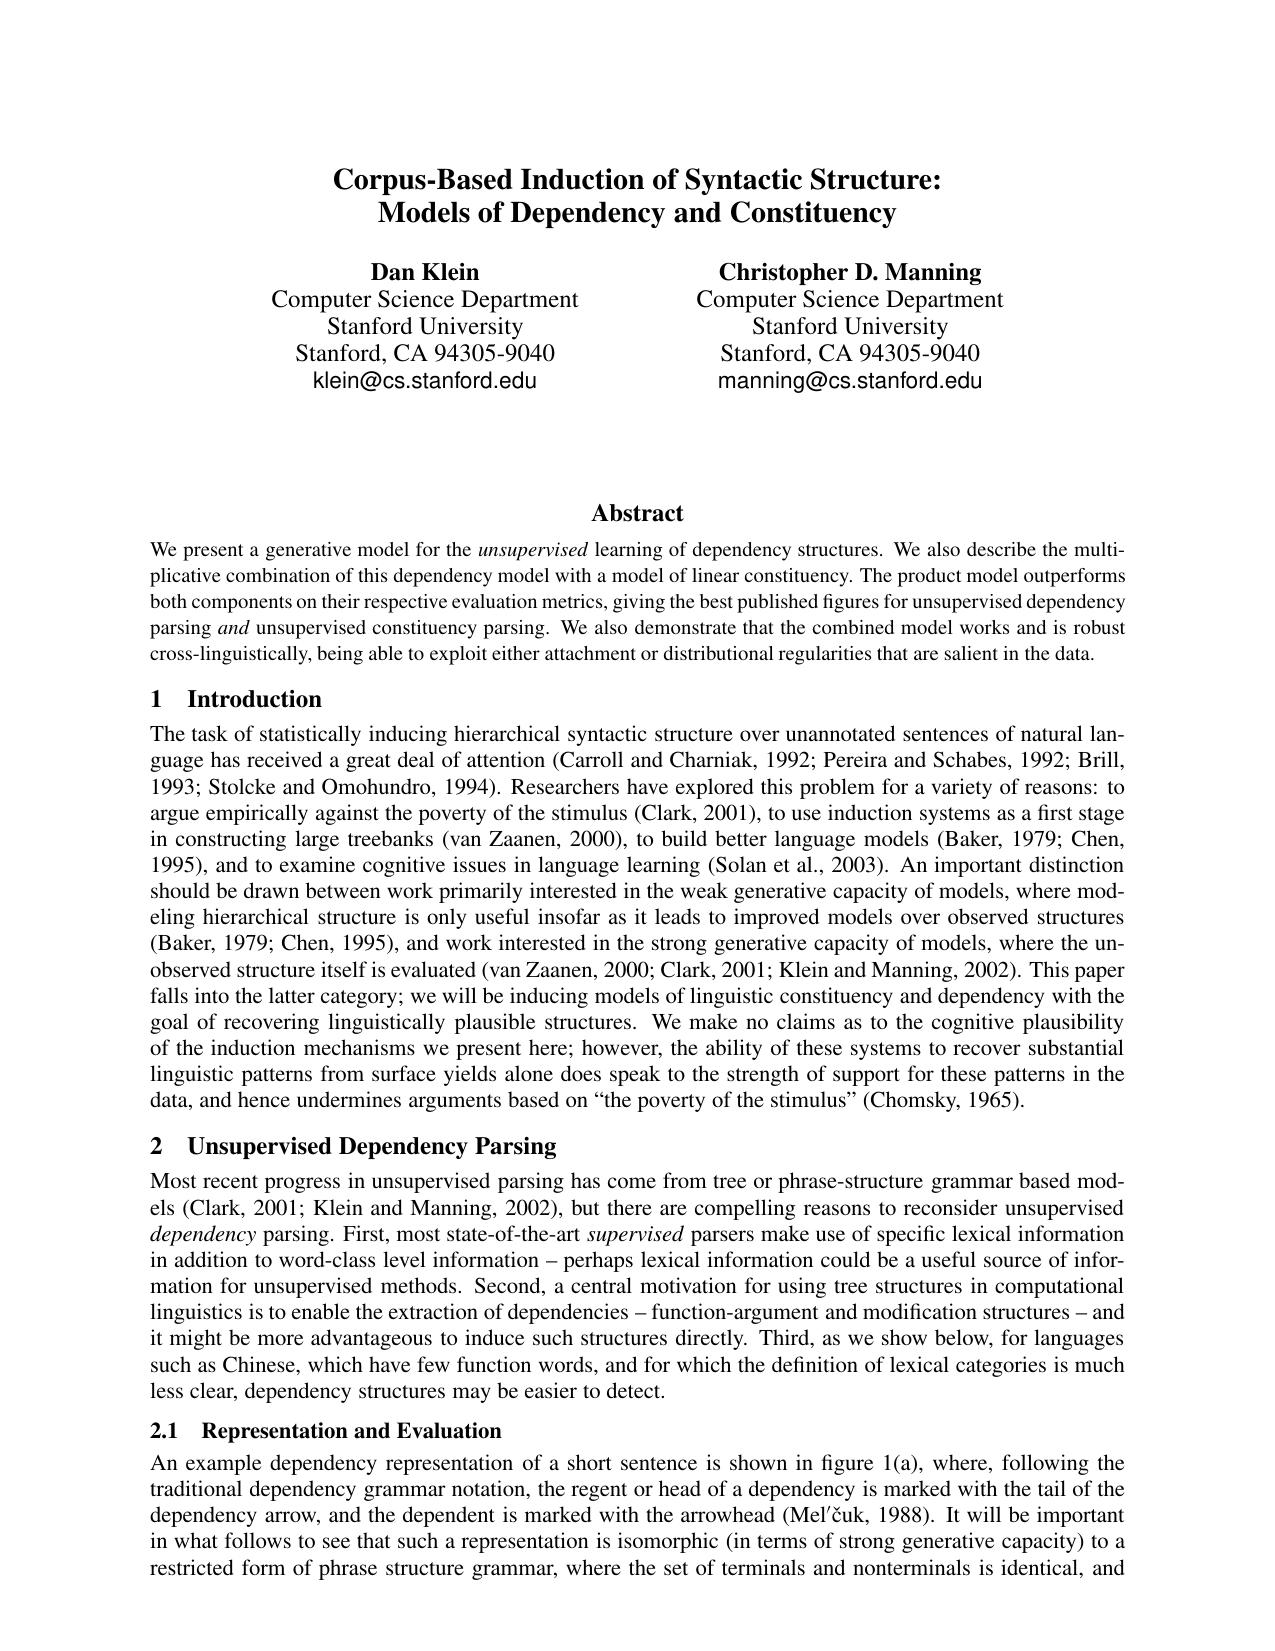 Corpus-Based Induction of Syntactic Structure: Models of Dependency and Constituency - Paper